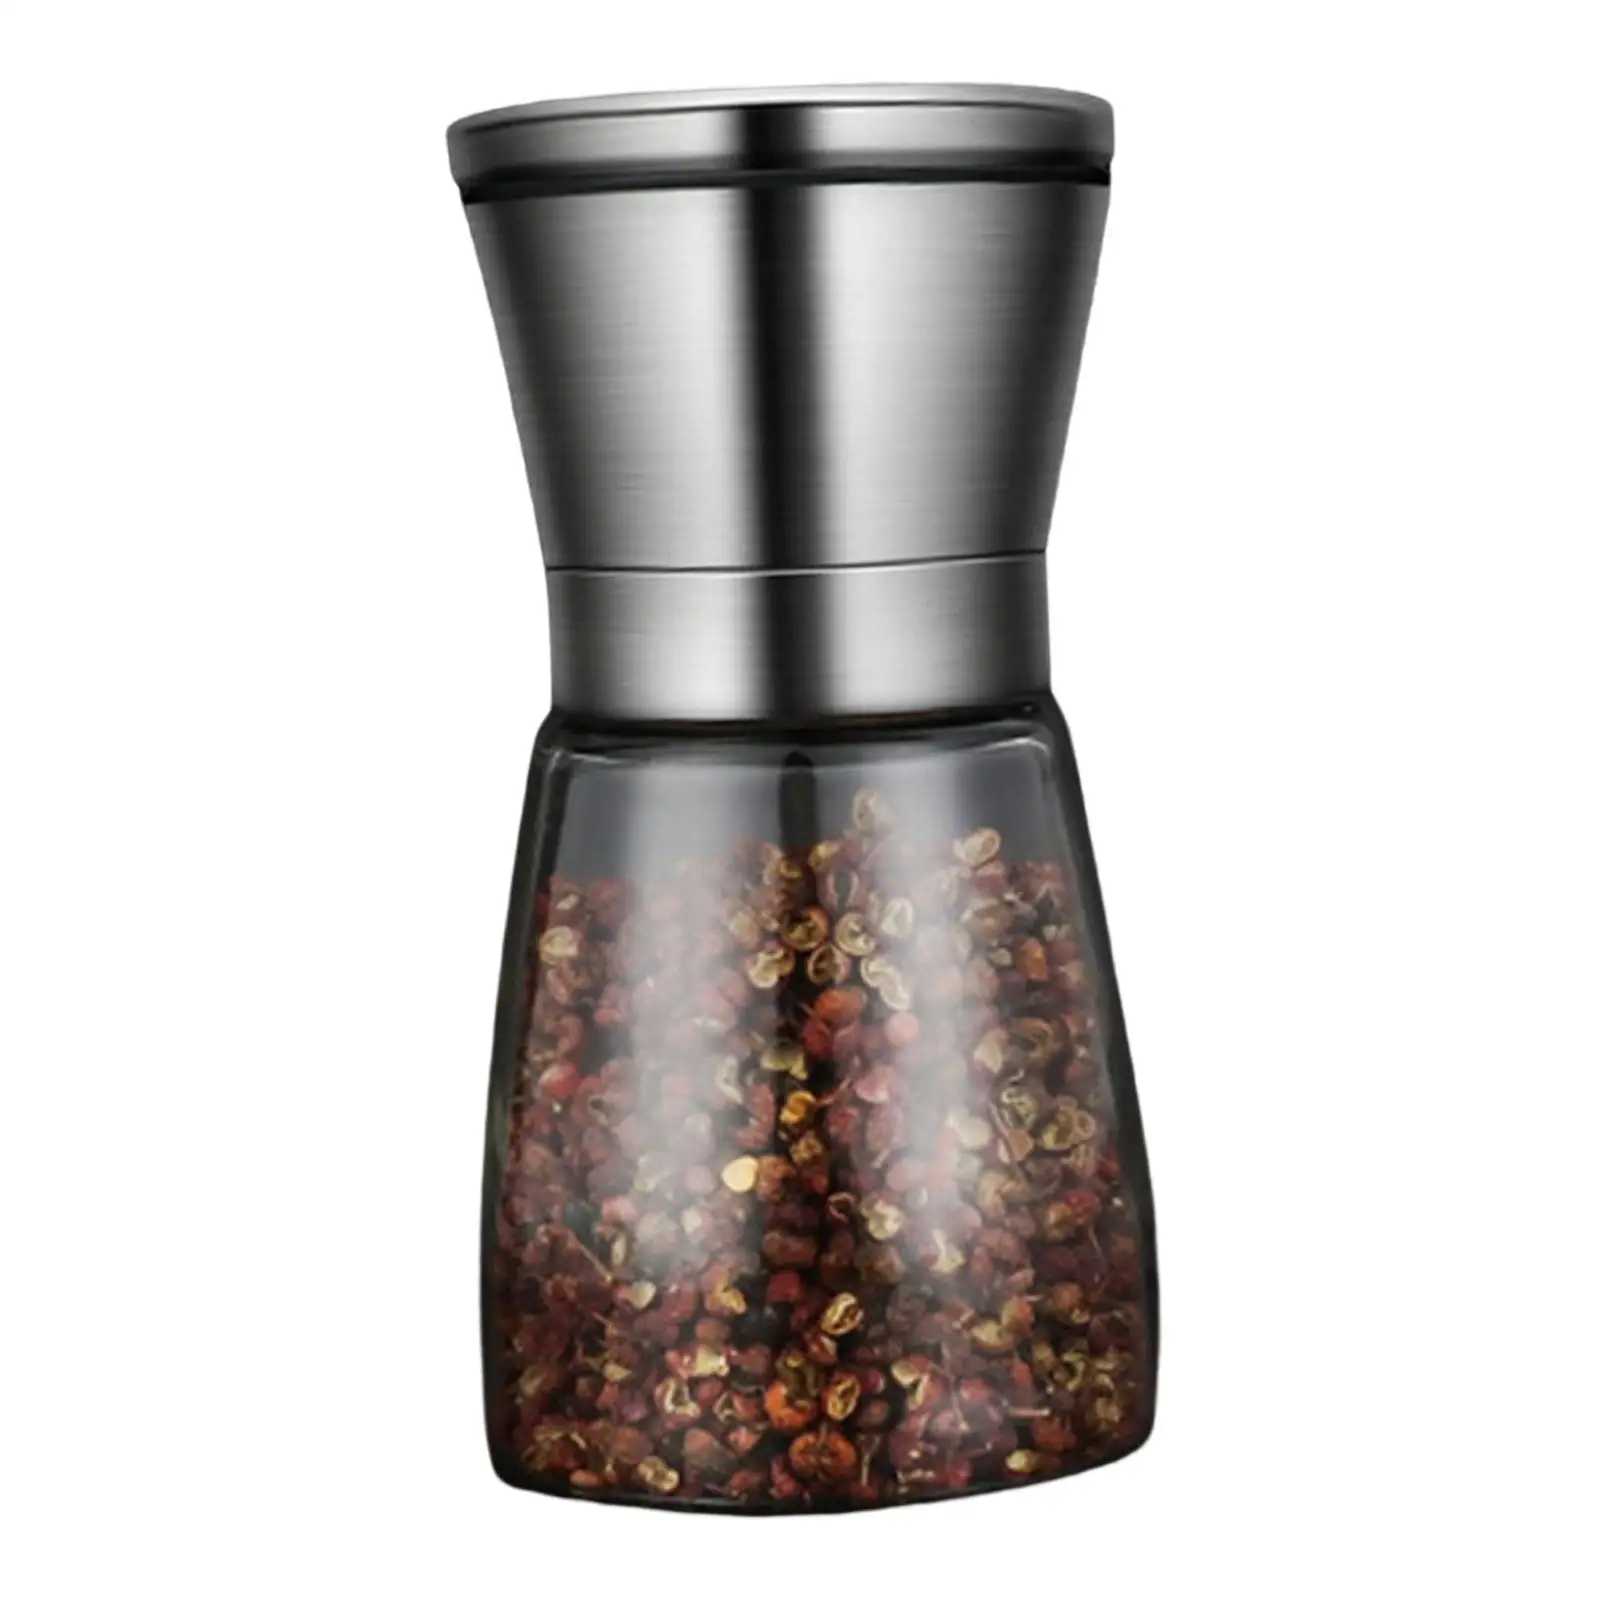 Multipurpose Pepper Mill Spice Jar Grain Mill Stainless Steel Spice Mill Kitchen Tools for Salt Spices Pepper